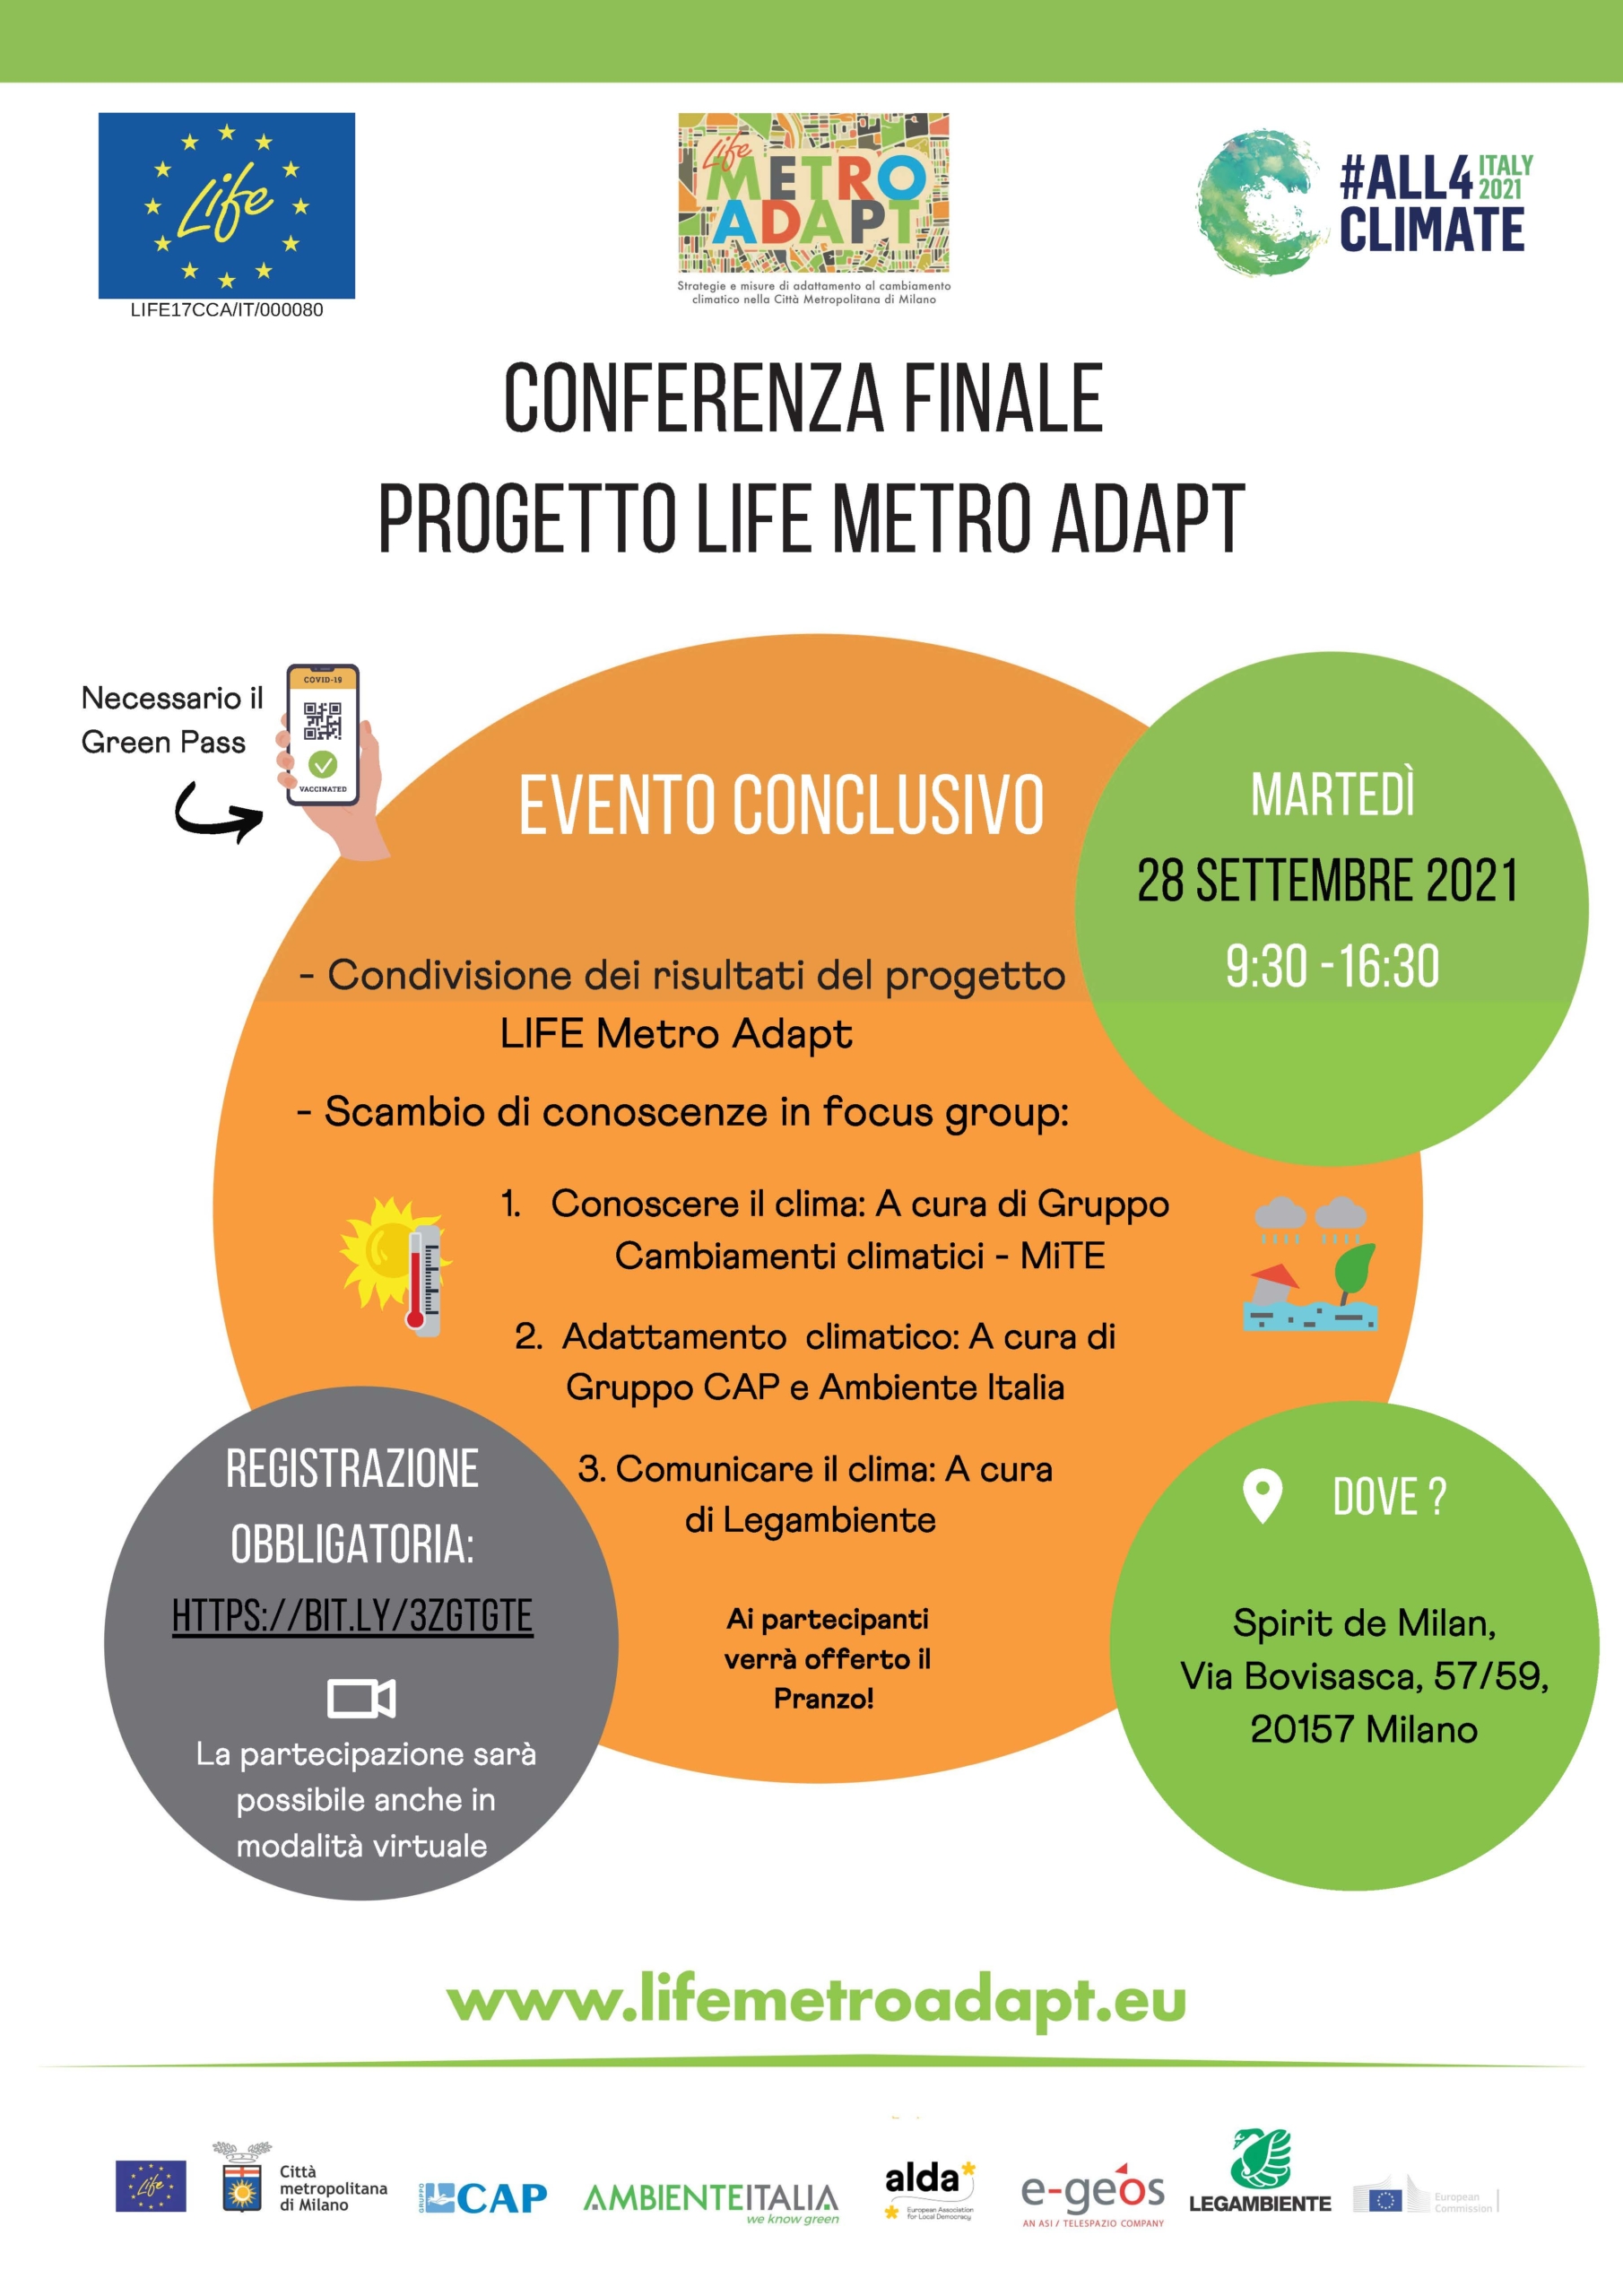 Climate change and urban adaptation: a conference in Milan on Tuesday 28 for the Life MetroAdapt project as part of Pre Cop.